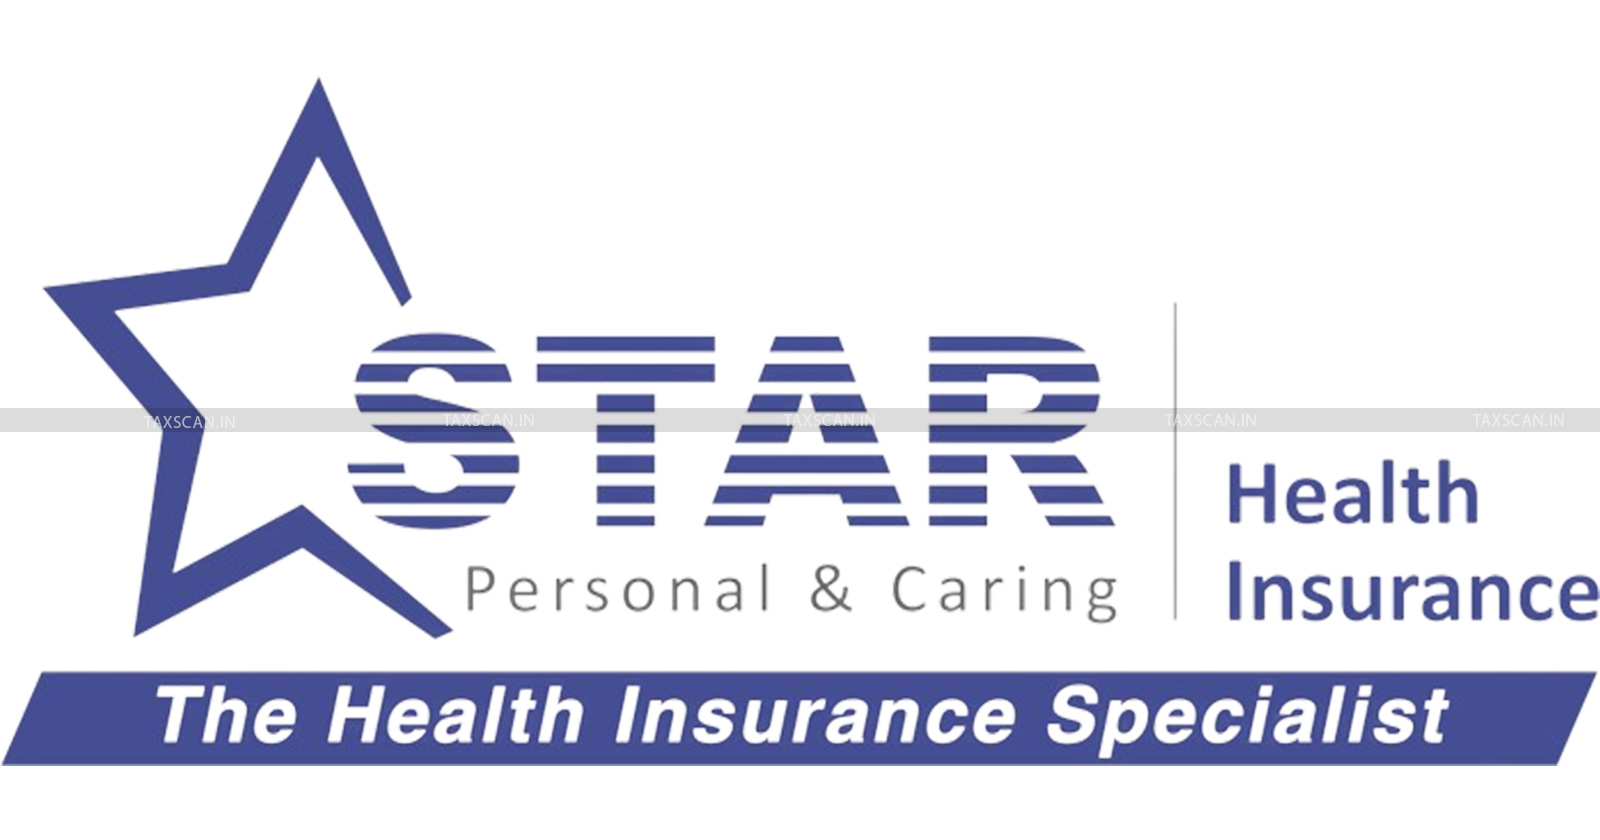 Star Health Insurance Company - Star Health GST demand notice - GST penalty on insurance companies - Section 73 GST demand notice - Taxscan